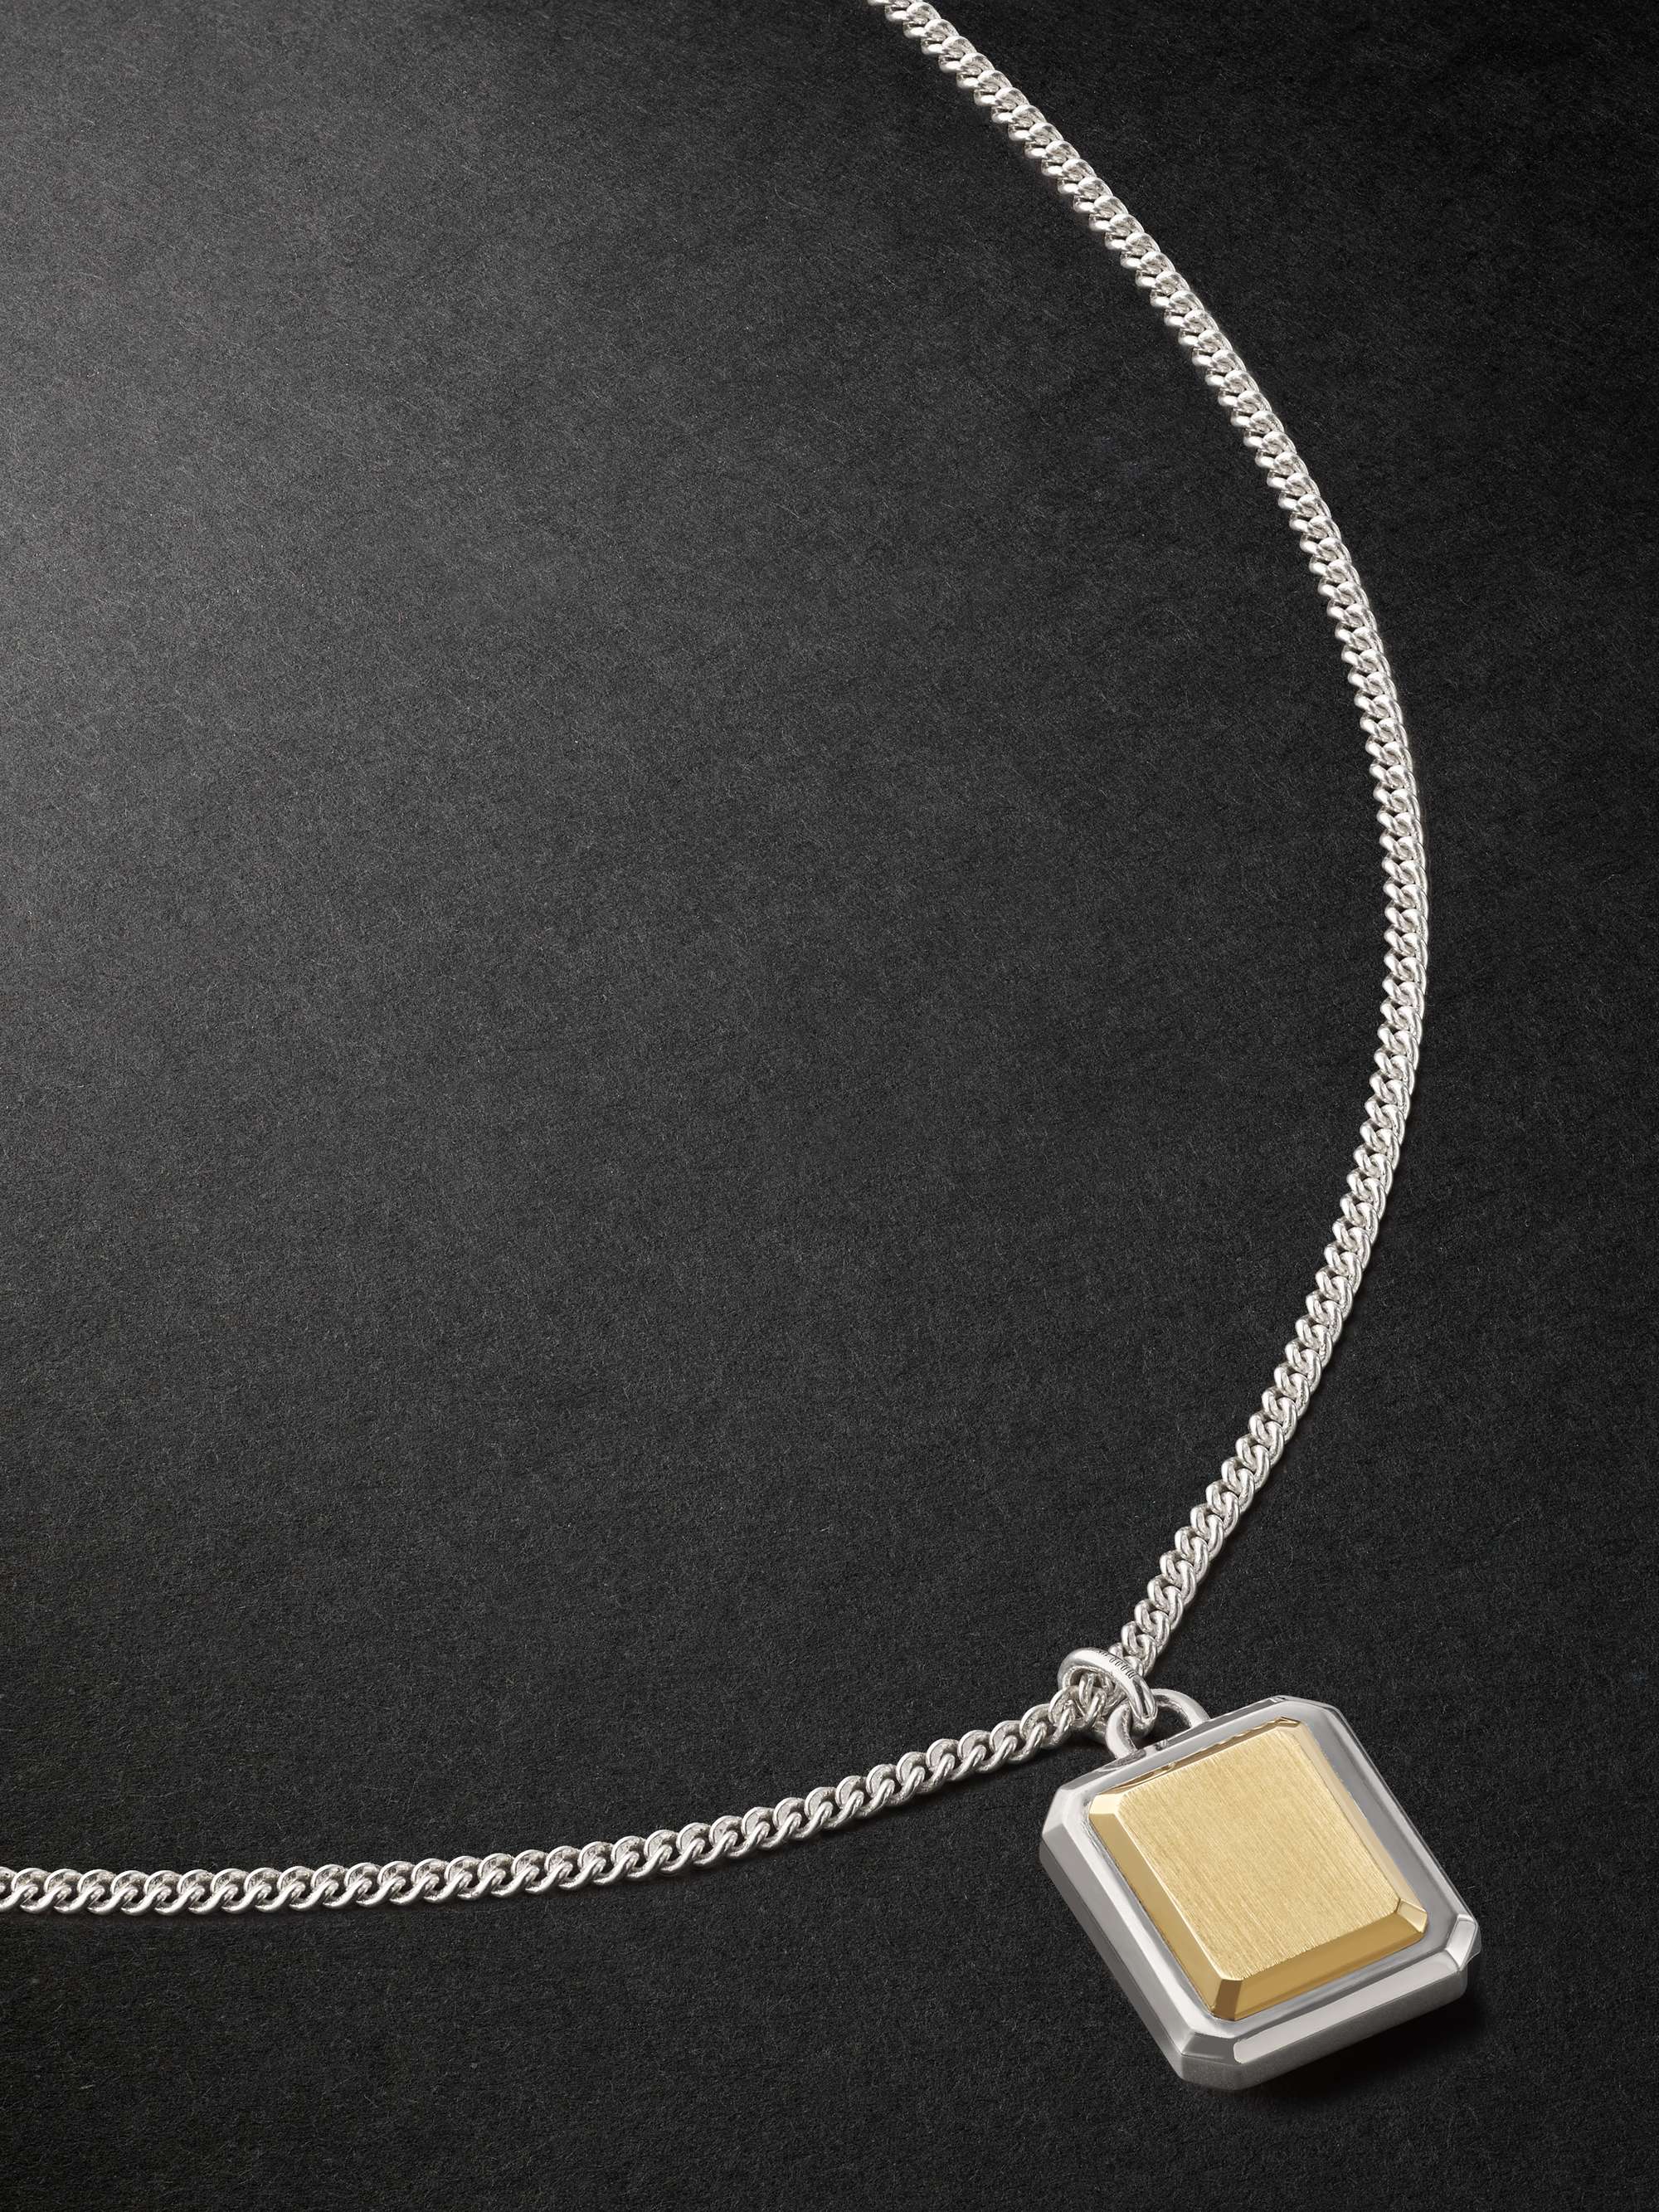 MAOR Pira Gold and Silver Necklace for Men